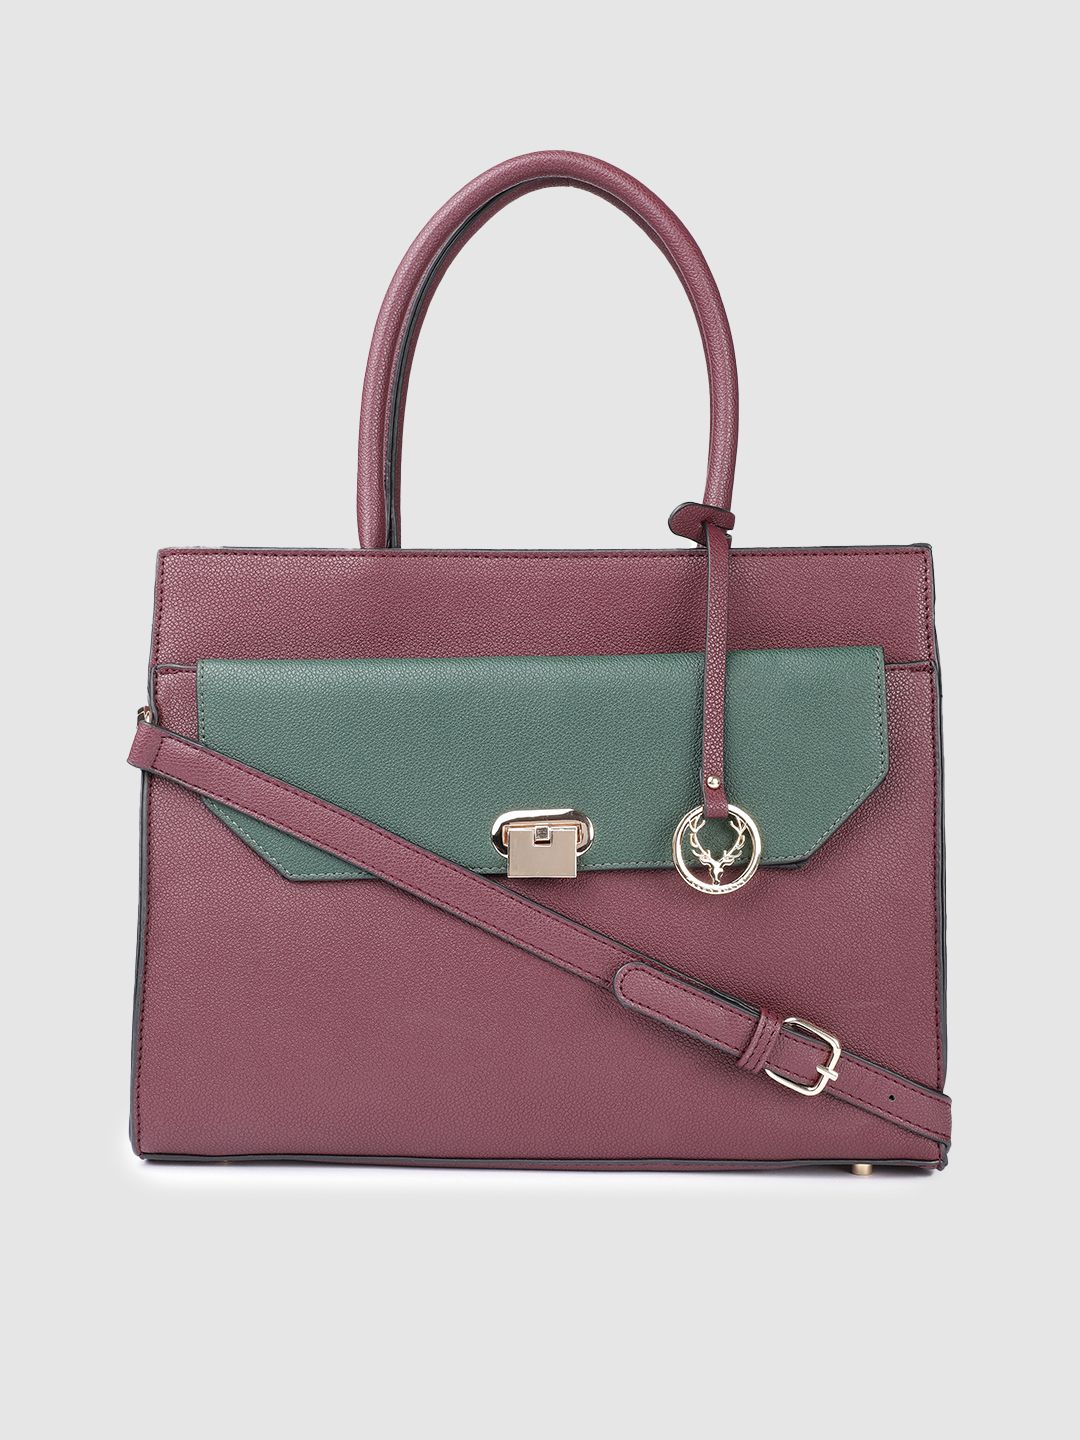 Allen Solly Burgundy & Green Colourblocked Structured Handheld Bag Price in India